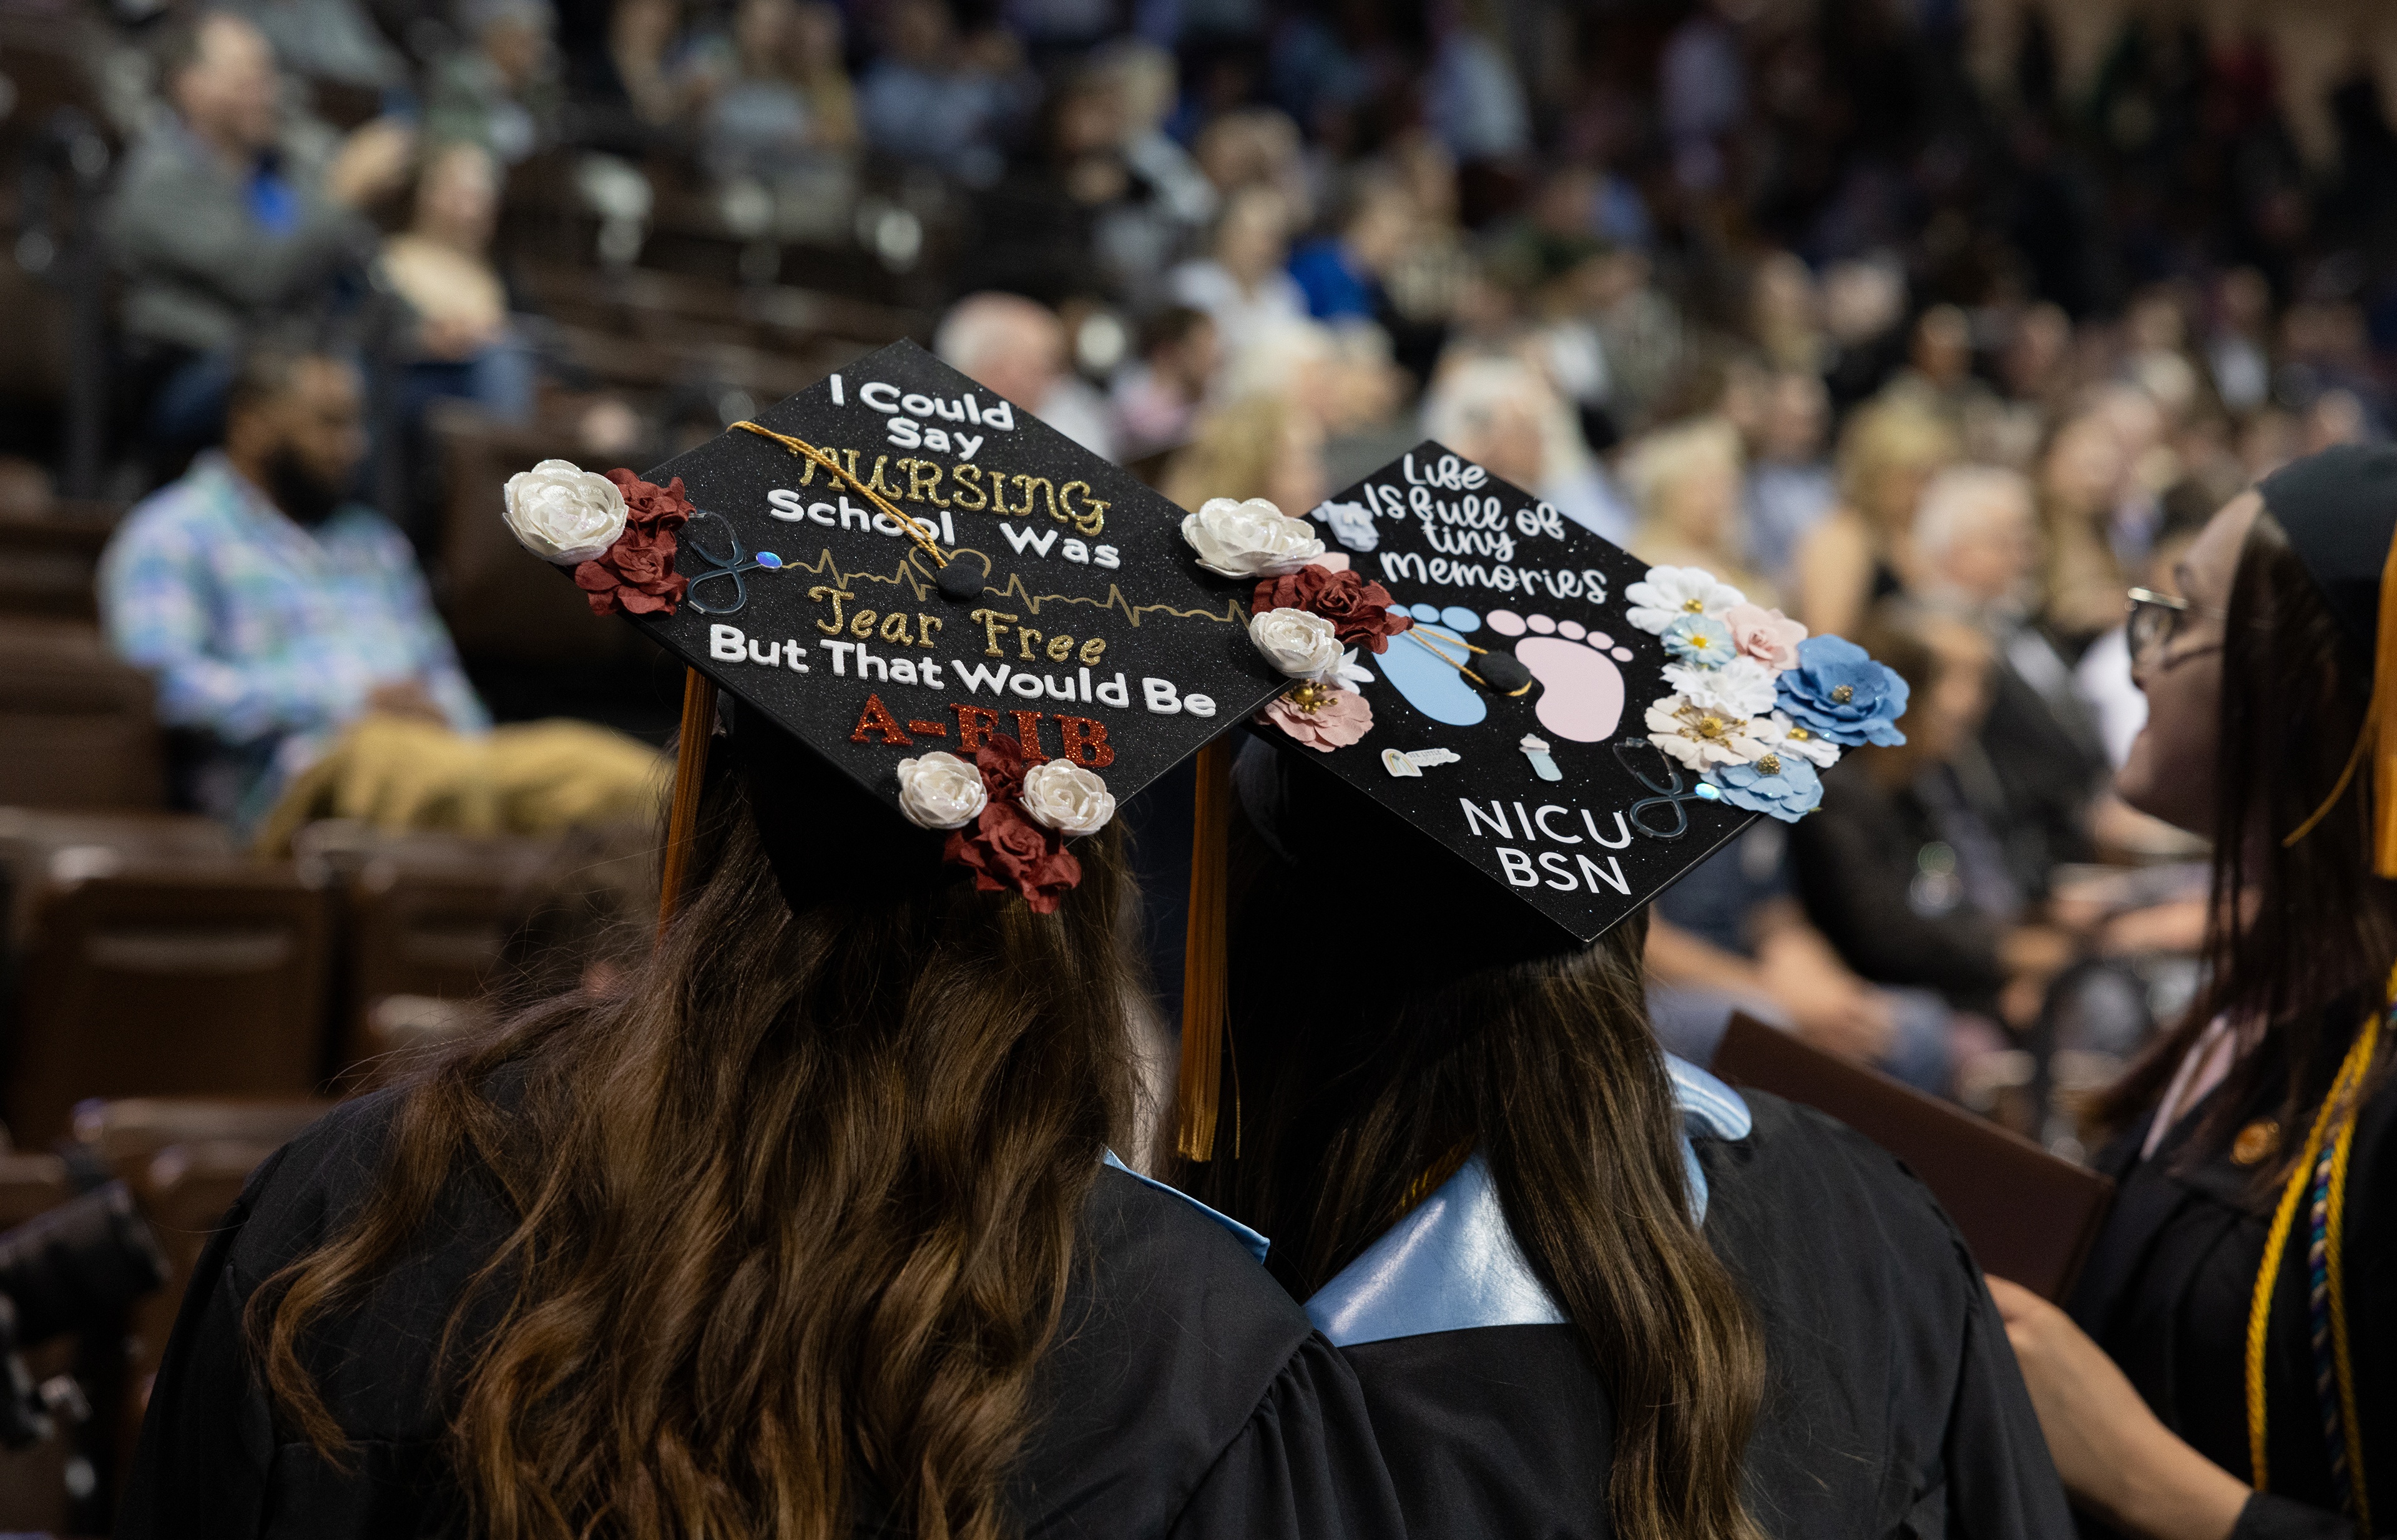 Two graduation caps are decorated with nursing profession motifs